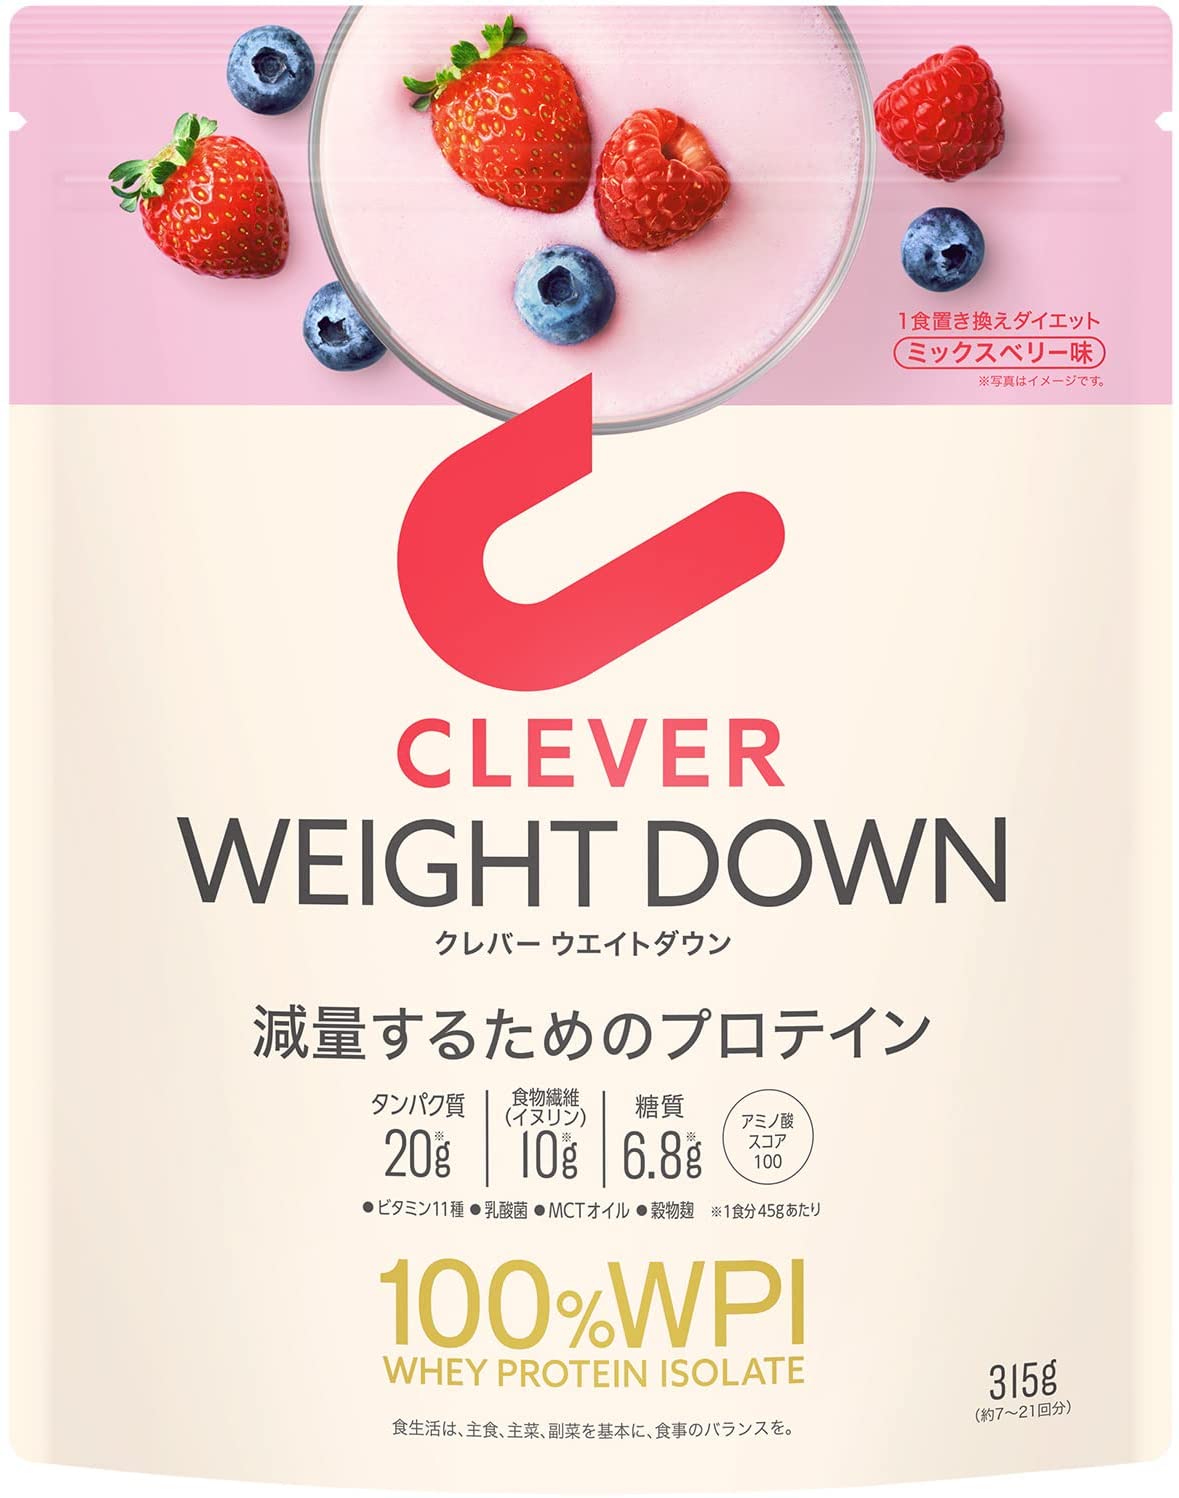 CLEVER WEIGHT DOWNのプロテイン画像